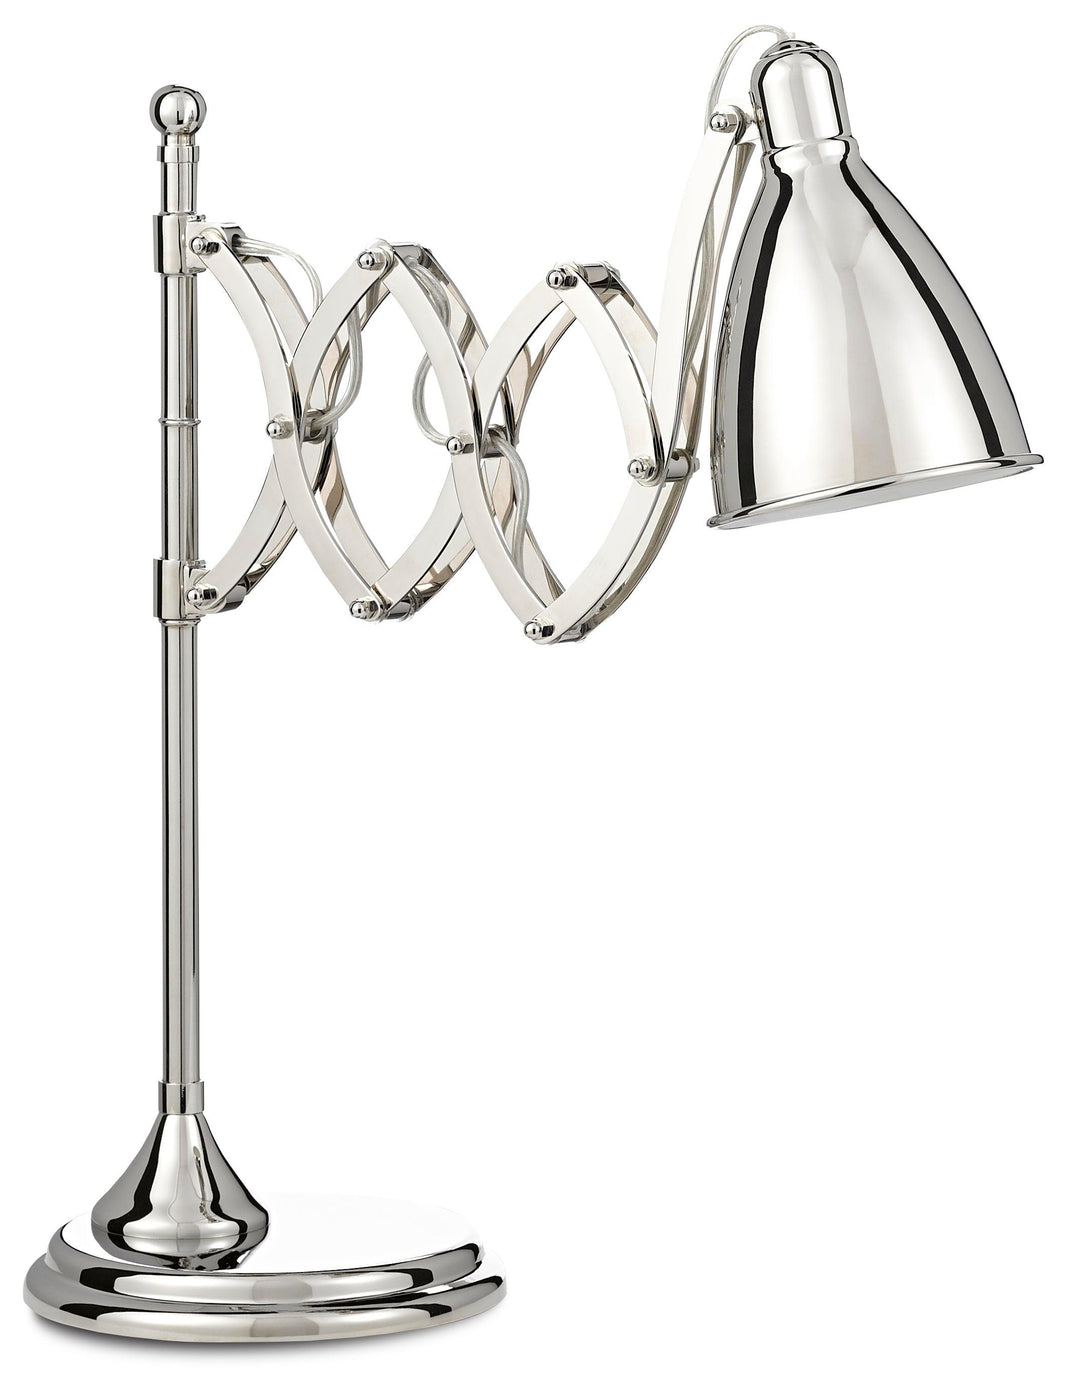 Reeves Desk Lamp - Casey & Company